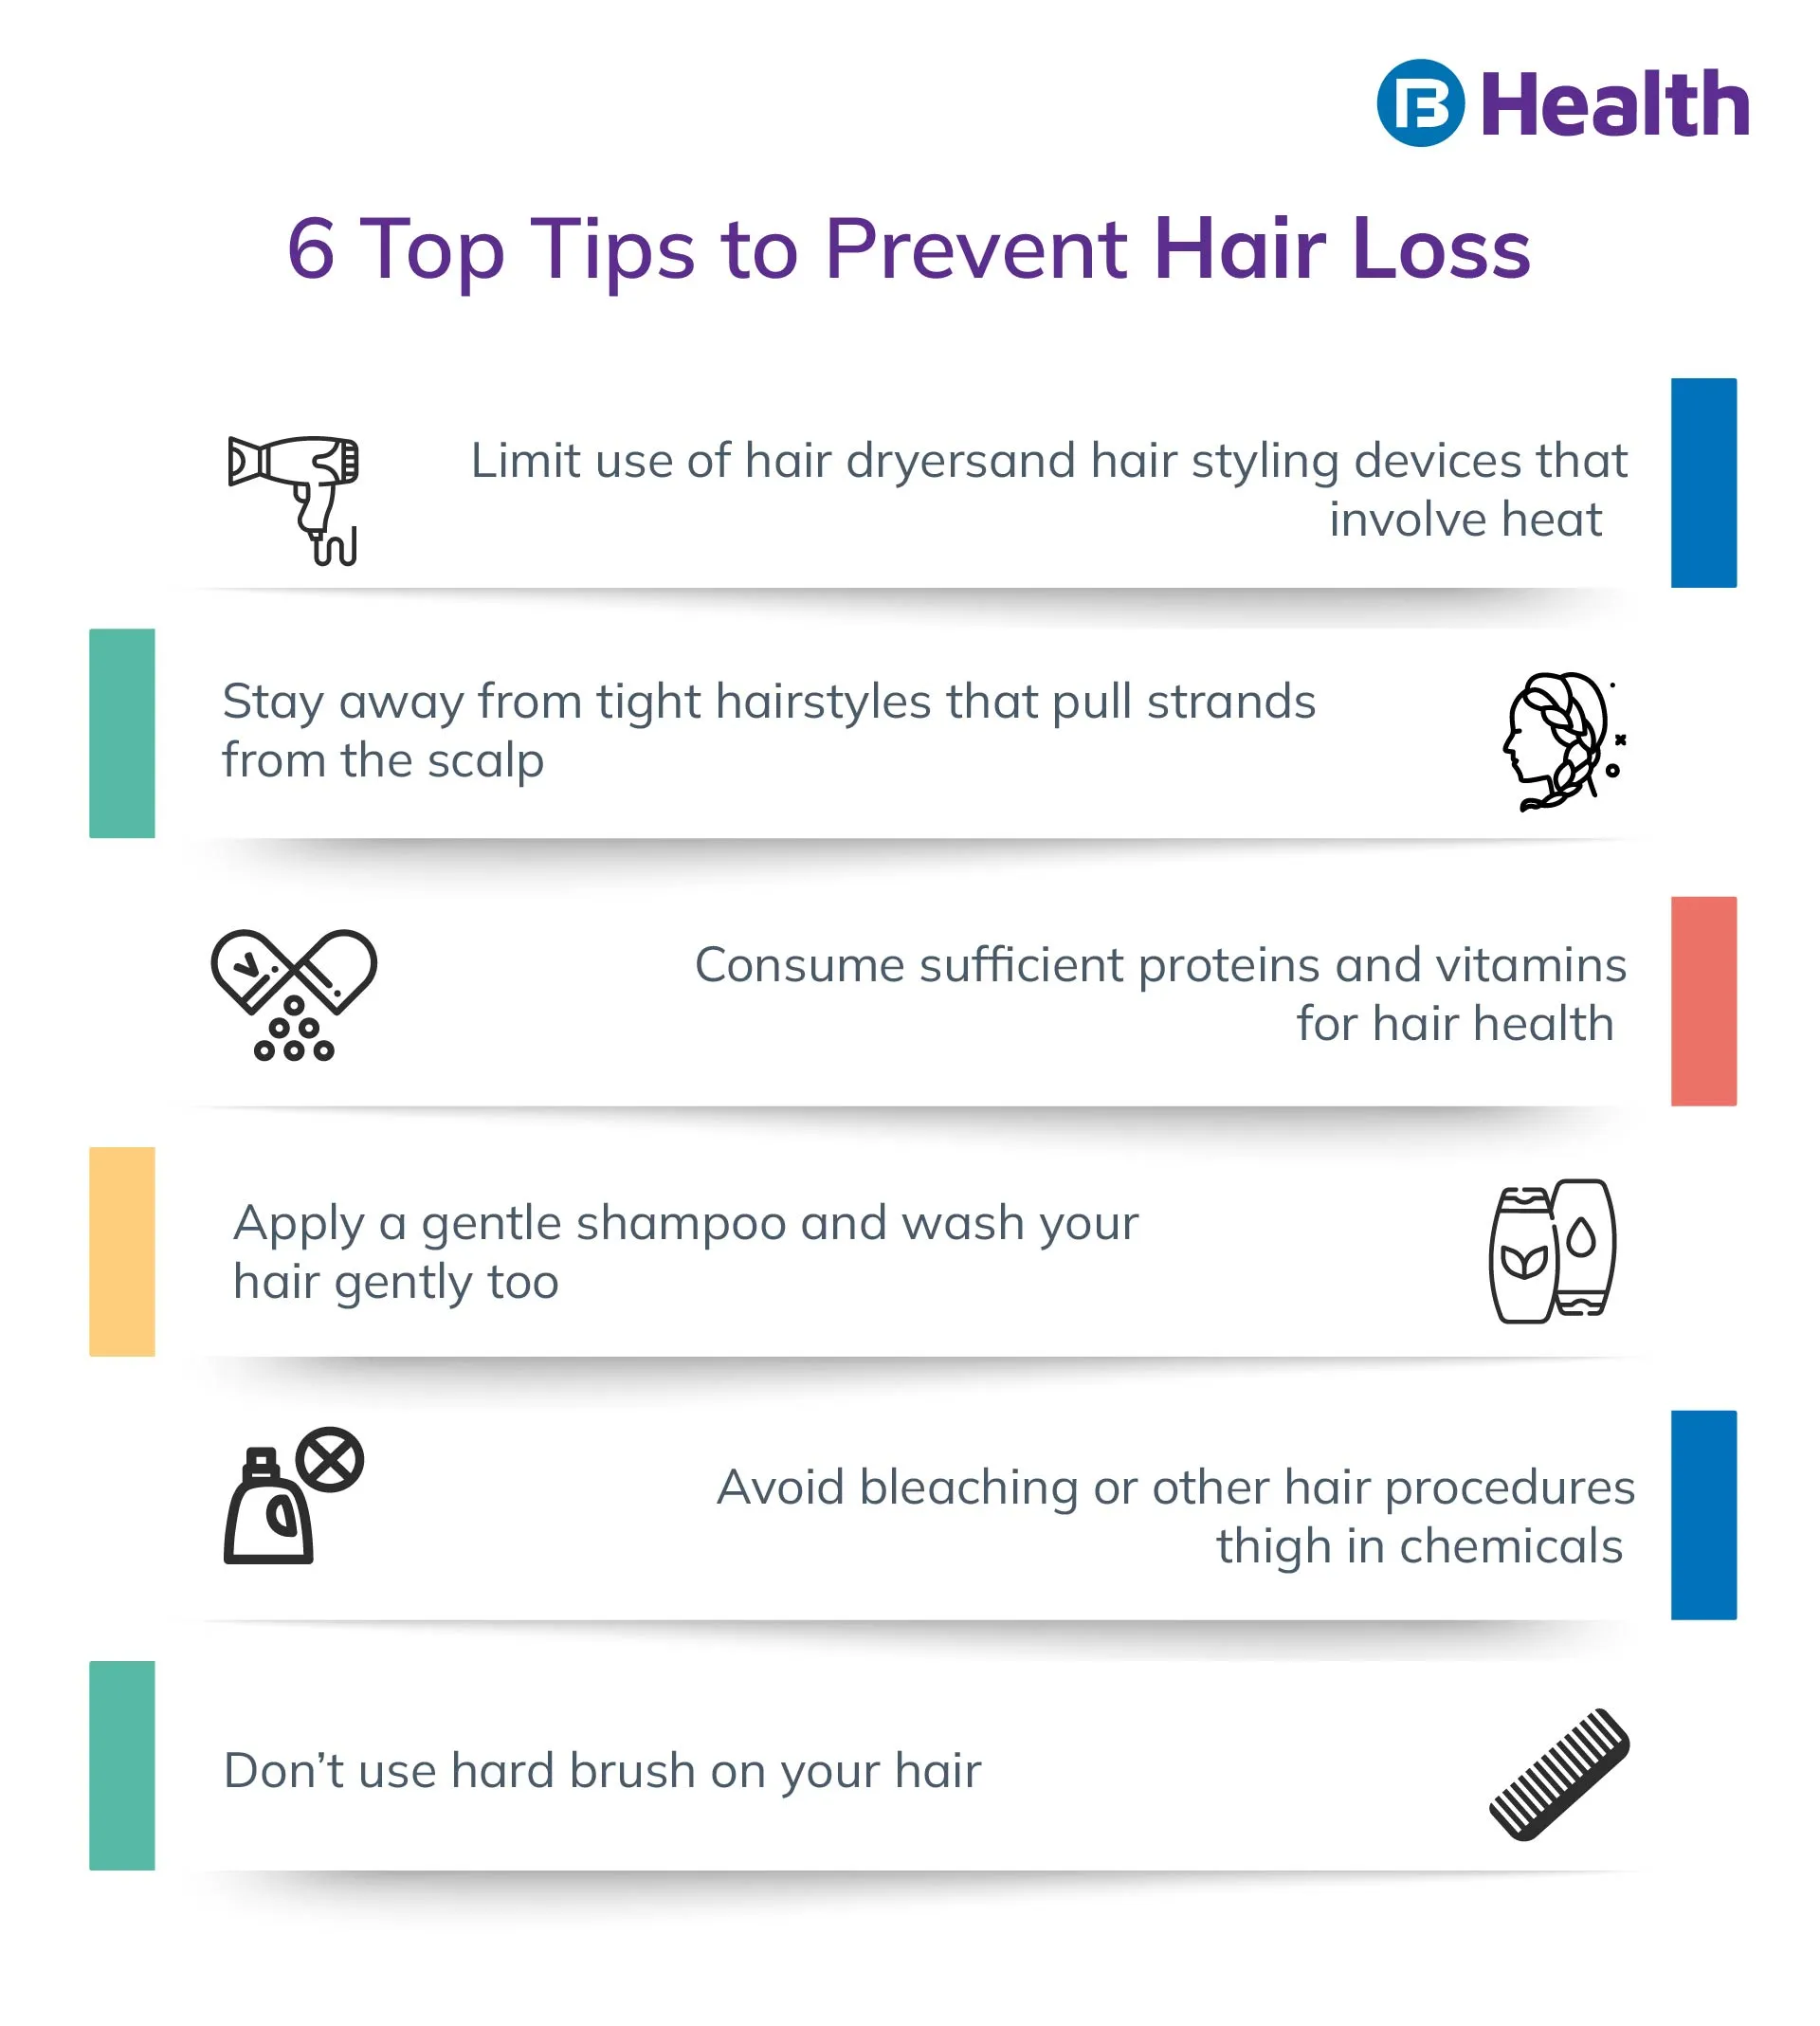 tips to prevent hair loss